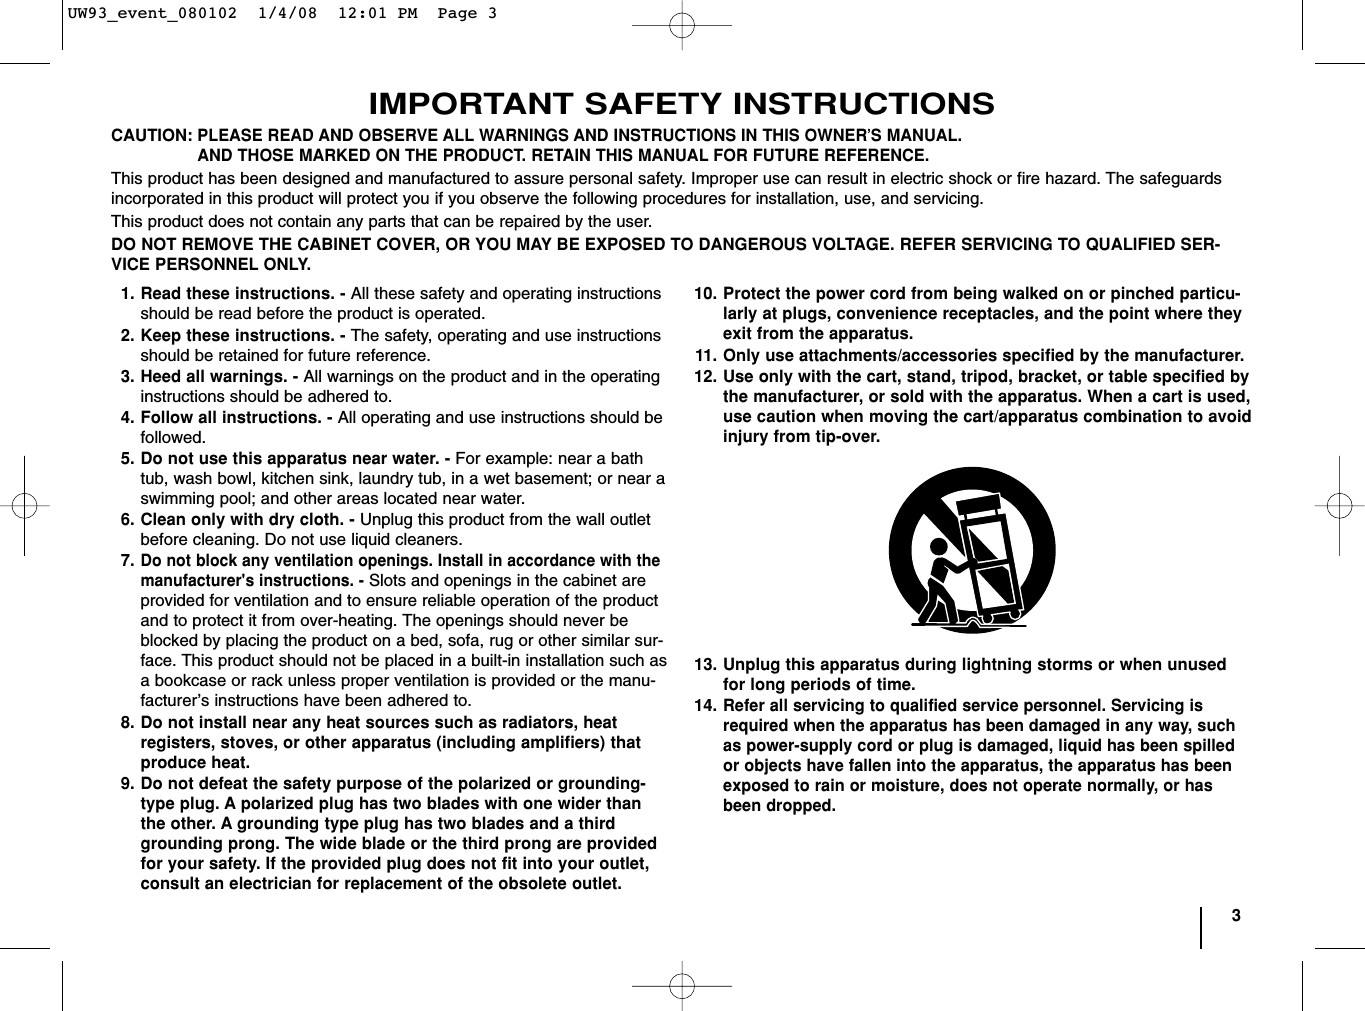 3IMPORTANT SAFETY INSTRUCTIONSCAUTION:PLEASE READ AND OBSERVE ALL WARNINGS AND INSTRUCTIONS IN THIS OWNER’S MANUAL. AND THOSE MARKED ON THE PRODUCT. RETAIN THIS MANUAL FOR FUTURE REFERENCE.This product has been designed and manufactured to assure personal safety. Improper use can result in electric shock or fire hazard. The safeguardsincorporated in this product will protect you if you observe the following procedures for installation, use, and servicing.This product does not contain any parts that can be repaired by the user.DO NOT REMOVE THE CABINET COVER, OR YOU MAY BE EXPOSED TO DANGEROUS VOLTAGE. REFER SERVICING TO QUALIFIED SER-VICE PERSONNEL ONLY.1. Read these instructions. - All these safety and operating instructionsshould be read before the product is operated.2. Keep these instructions. - The safety, operating and use instructionsshould be retained for future reference.3. Heed all warnings. - All warnings on the product and in the operatinginstructions should be adhered to.4. Follow all instructions. - All operating and use instructions should befollowed.5. Do not use this apparatus near water. - For example: near a bathtub, wash bowl, kitchen sink, laundry tub, in a wet basement; or near aswimming pool; and other areas located near water.6. Clean only with dry cloth. - Unplug this product from the wall outletbefore cleaning. Do not use liquid cleaners.7.Do not block any ventilation openings. Install in accordance with themanufacturer&apos;s instructions. - Slots and openings in the cabinet areprovided for ventilation and to ensure reliable operation of the productand to protect it from over-heating. The openings should never beblocked by placing the product on a bed, sofa, rug or other similar sur-face. This product should not be placed in a built-in installation such asa bookcase or rack unless proper ventilation is provided or the manu-facturer’s instructions have been adhered to.8. Do not install near any heat sources such as radiators, heat registers, stoves, or other apparatus (including amplifiers) thatproduce heat. 9. Do not defeat the safety purpose of the polarized or grounding-type plug. A polarized plug has two blades with one wider thanthe other. A grounding type plug has two blades and a thirdgrounding prong. The wide blade or the third prong are providedfor your safety. If the provided plug does not fit into your outlet,consult an electrician for replacement of the obsolete outlet.10. Protect the power cord from being walked on or pinched particu-larly at plugs, convenience receptacles, and the point where theyexit from the apparatus.11. Only use attachments/accessories specified by the manufacturer.12. Use only with the cart, stand, tripod, bracket, or table specified bythe manufacturer, or sold with the apparatus. When a cart is used,use caution when moving the cart/apparatus combination to avoidinjury from tip-over.13. Unplug this apparatus during lightning storms or when unusedfor long periods of time.14.Refer all servicing to qualified service personnel. Servicing isrequired when the apparatus has been damaged in any way, suchas power-supply cord or plug is damaged, liquid has been spilledor objects have fallen into the apparatus, the apparatus has beenexposed to rain or moisture, does not operate normally, or hasbeen dropped.UW93_event_080102  1/4/08  12:01 PM  Page 3